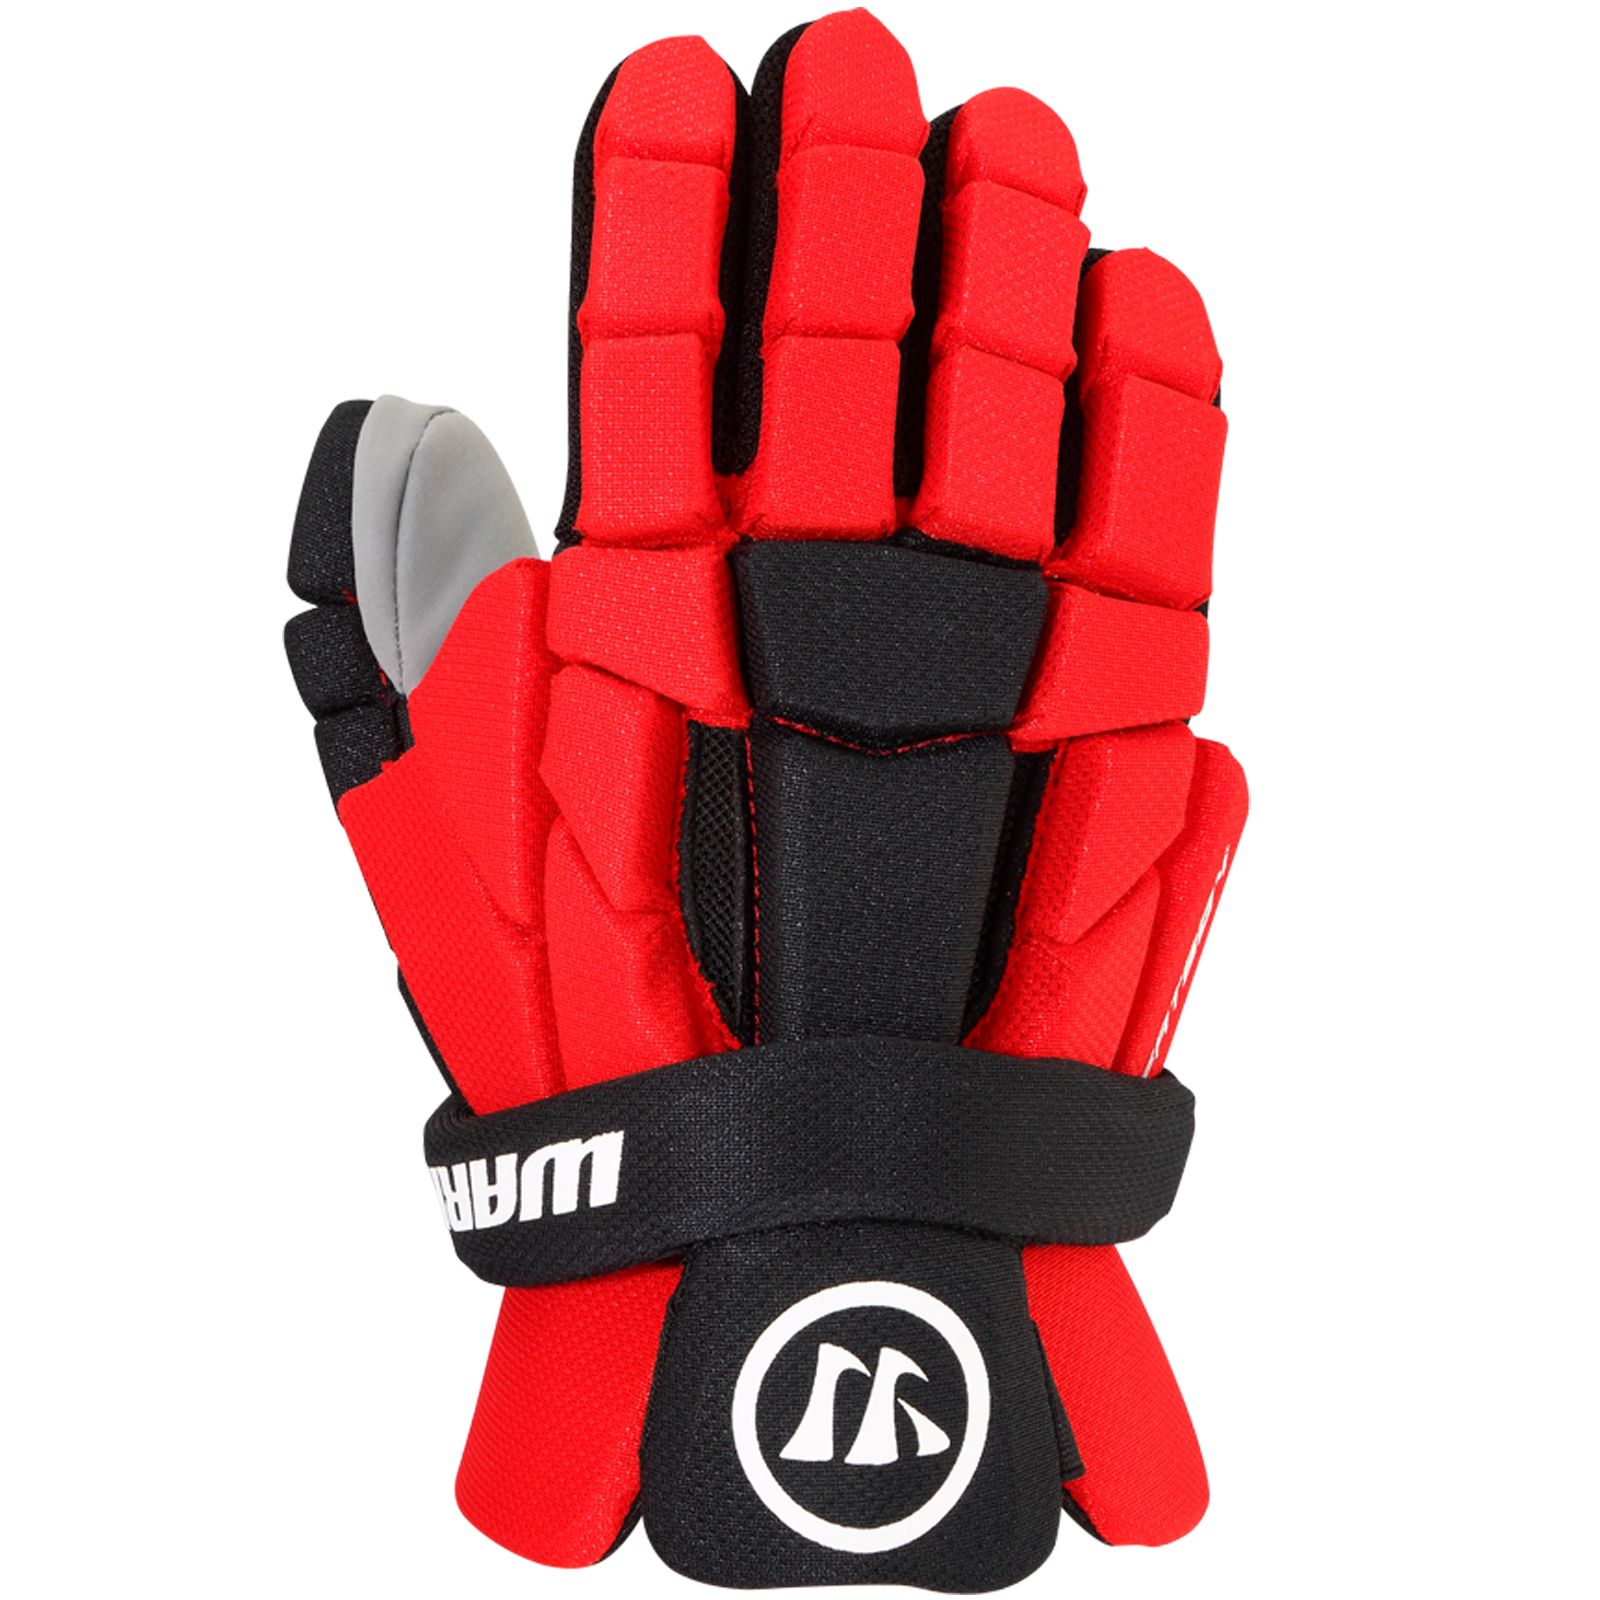 Fatboy Lite Glove, Black with Red image number 0